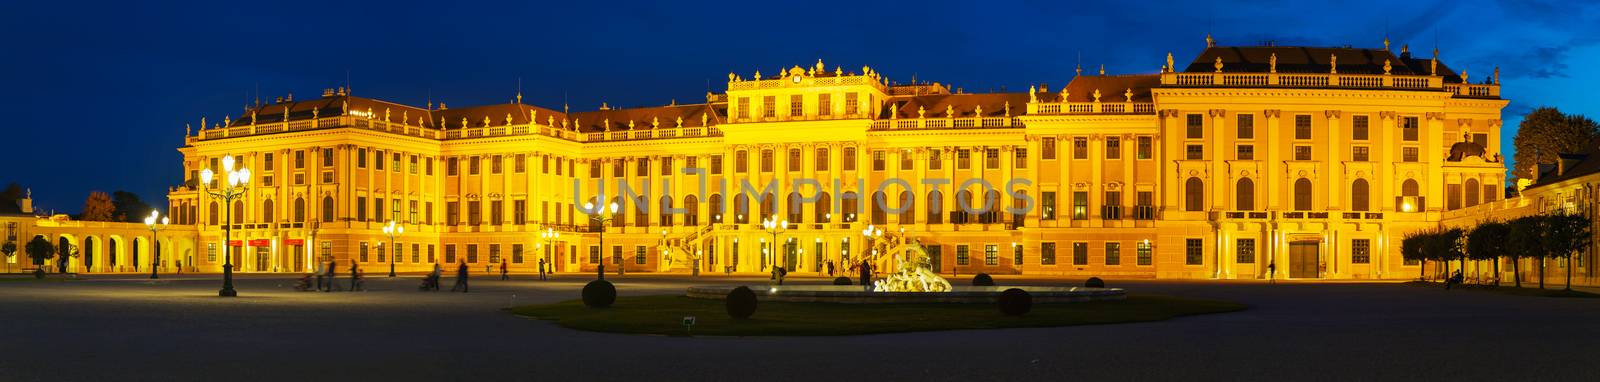 Schonbrunn palace in Vienna in the evening by AndreyKr